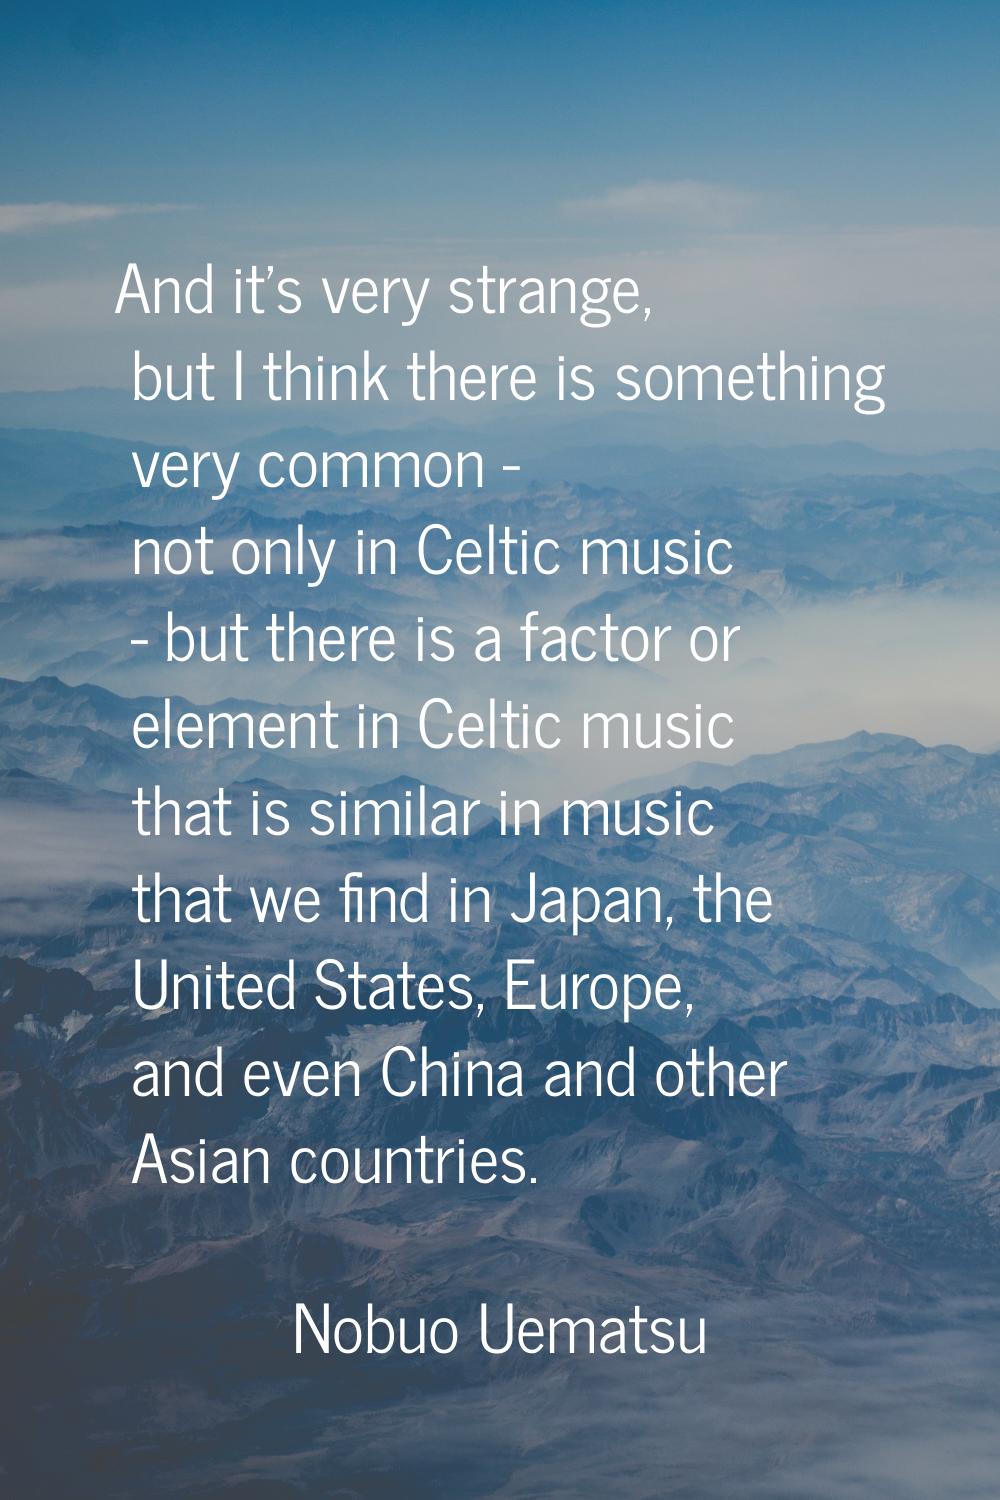 And it's very strange, but I think there is something very common - not only in Celtic music - but 